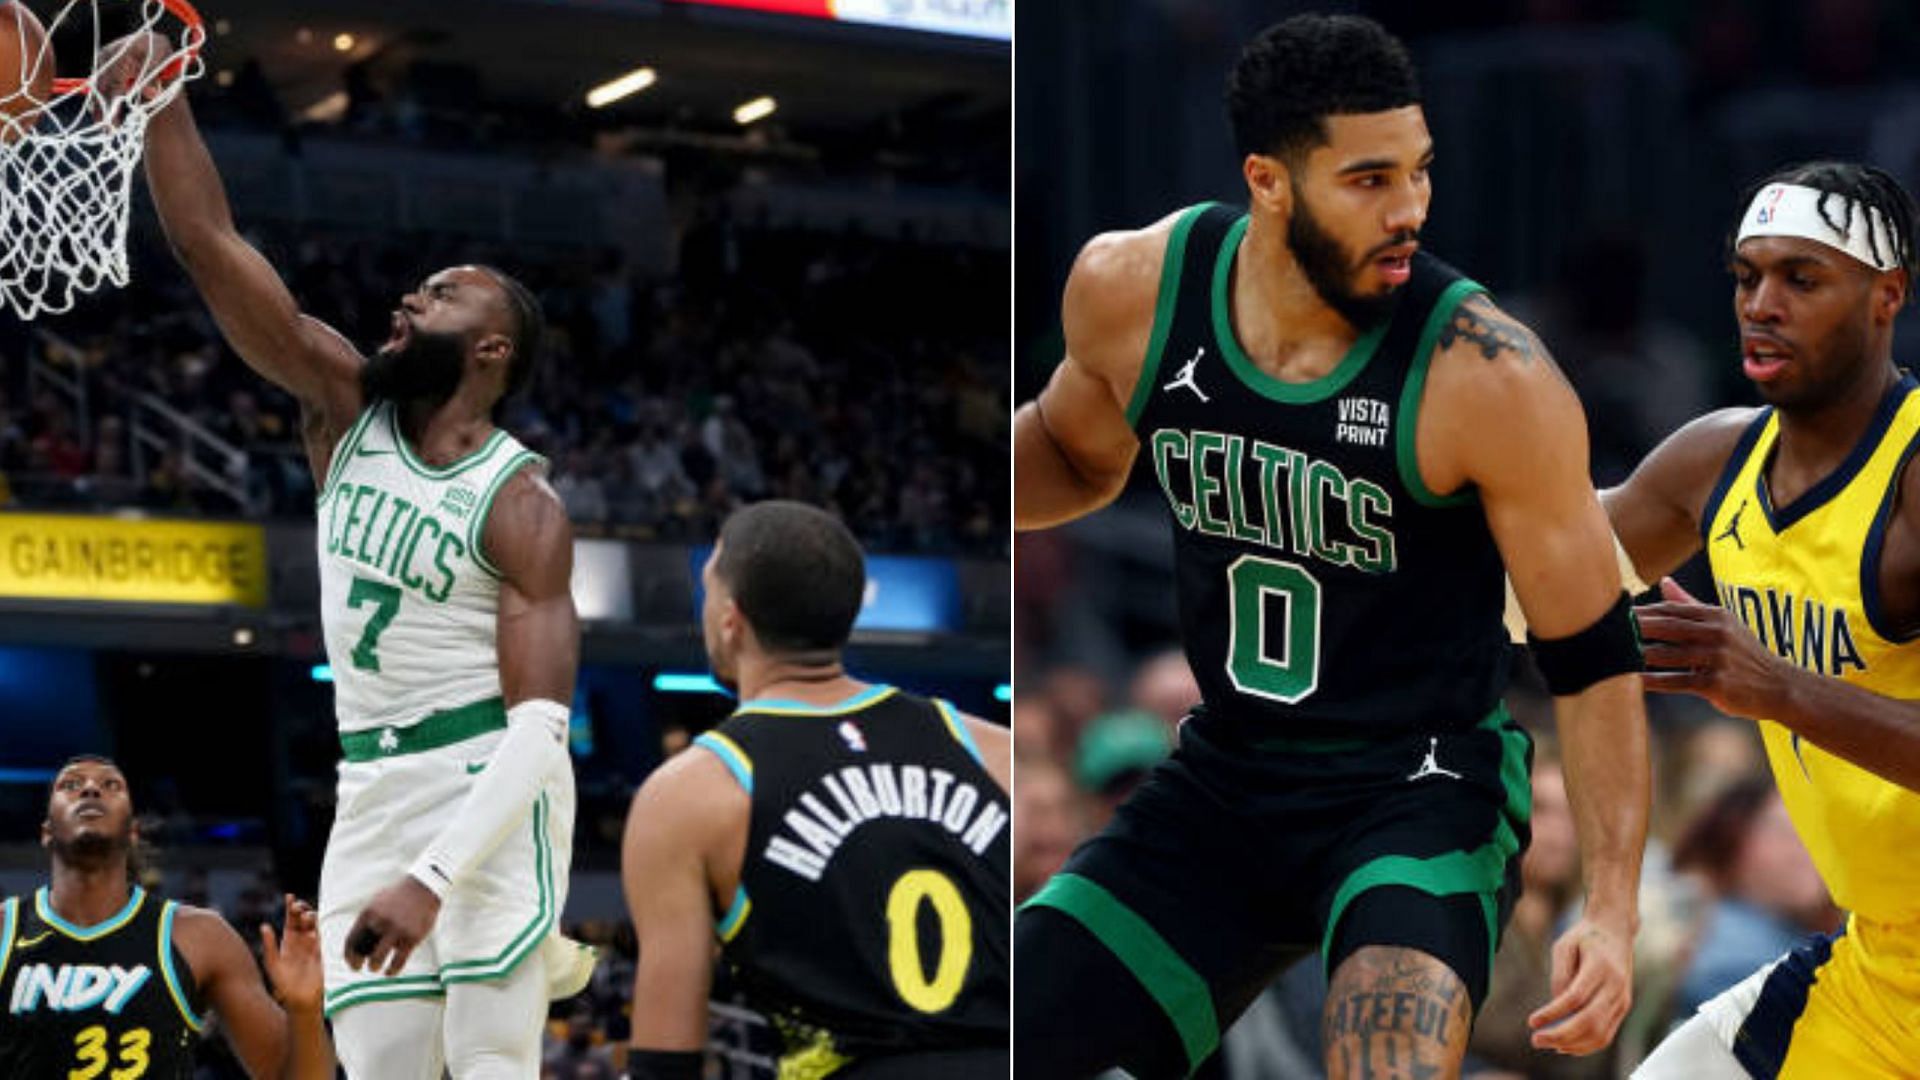 Boston Celtics vs. Indiana Pacers starting lineups and depth chart for